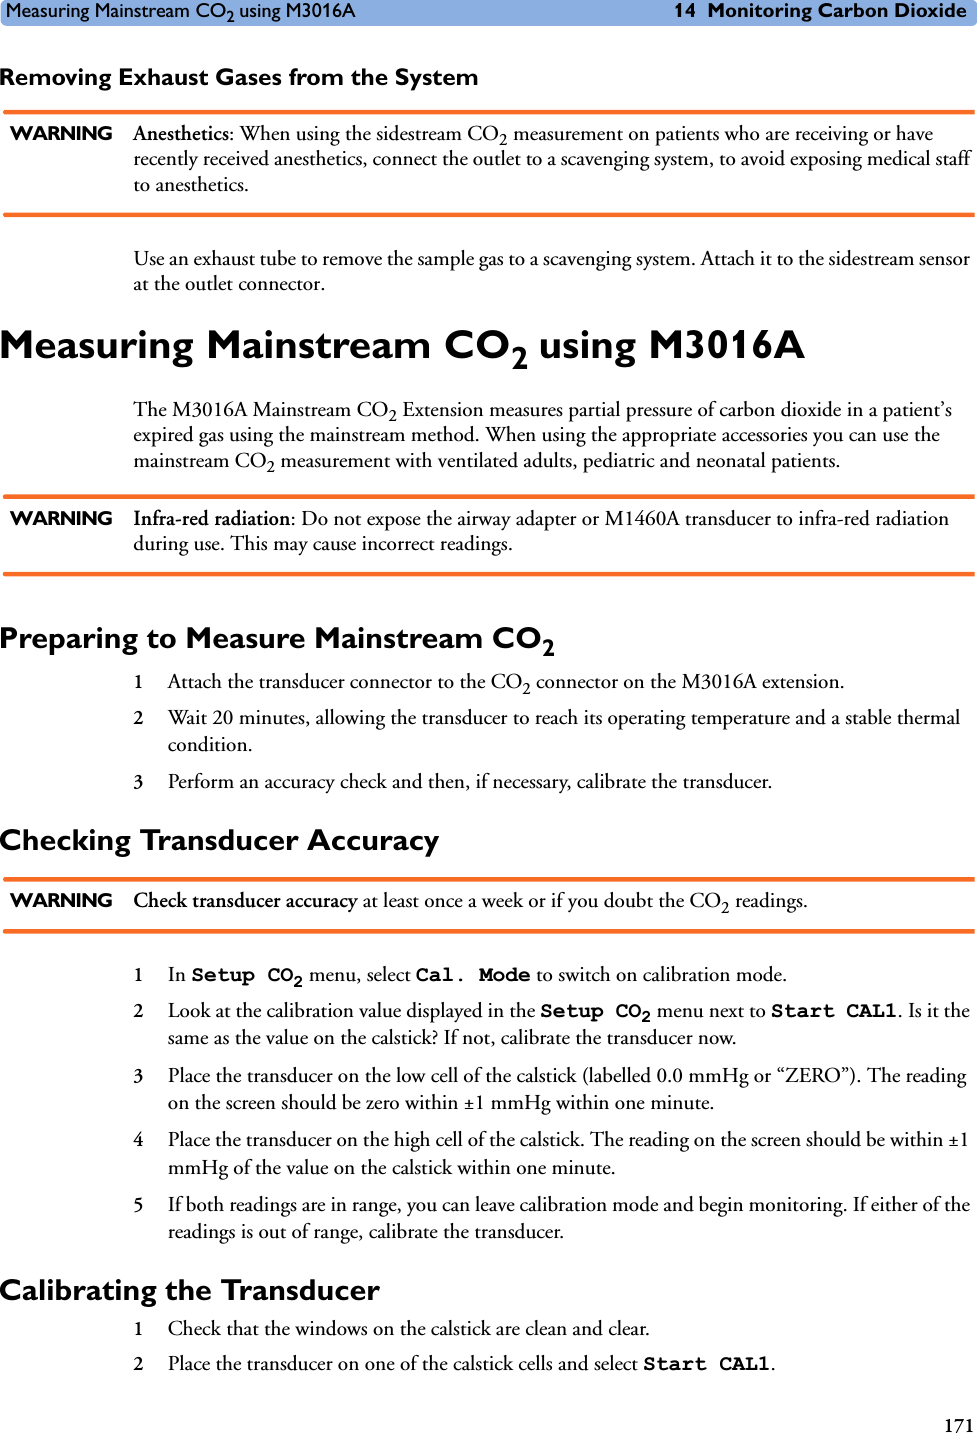 Measuring Mainstream CO2 using M3016A 14 Monitoring Carbon Dioxide171Removing Exhaust Gases from the SystemWARNING Anesthetics: When using the sidestream CO2 measurement on patients who are receiving or have recently received anesthetics, connect the outlet to a scavenging system, to avoid exposing medical staff to anesthetics.Use an exhaust tube to remove the sample gas to a scavenging system. Attach it to the sidestream sensor at the outlet connector.Measuring Mainstream CO2 using M3016AThe M3016A Mainstream CO2 Extension measures partial pressure of carbon dioxide in a patient’s expired gas using the mainstream method. When using the appropriate accessories you can use the mainstream CO2 measurement with ventilated adults, pediatric and neonatal patients.WARNING Infra-red radiation: Do not expose the airway adapter or M1460A transducer to infra-red radiation during use. This may cause incorrect readings.Preparing to Measure Mainstream CO21Attach the transducer connector to the CO2 connector on the M3016A extension.2Wait 20 minutes, allowing the transducer to reach its operating temperature and a stable thermal condition.3Perform an accuracy check and then, if necessary, calibrate the transducer.Checking Transducer AccuracyWARNING Check transducer accuracy at least once a week or if you doubt the CO2 readings.1In Setup CO2 menu, select Cal. Mode to switch on calibration mode.2Look at the calibration value displayed in the Setup CO2 menu next to Start CAL1. Is it the same as the value on the calstick? If not, calibrate the transducer now.3Place the transducer on the low cell of the calstick (labelled 0.0 mmHg or “ZERO”). The reading on the screen should be zero within ±1 mmHg within one minute.4Place the transducer on the high cell of the calstick. The reading on the screen should be within ±1 mmHg of the value on the calstick within one minute.5If both readings are in range, you can leave calibration mode and begin monitoring. If either of the readings is out of range, calibrate the transducer.Calibrating the Transducer1Check that the windows on the calstick are clean and clear.2Place the transducer on one of the calstick cells and select Start CAL1.